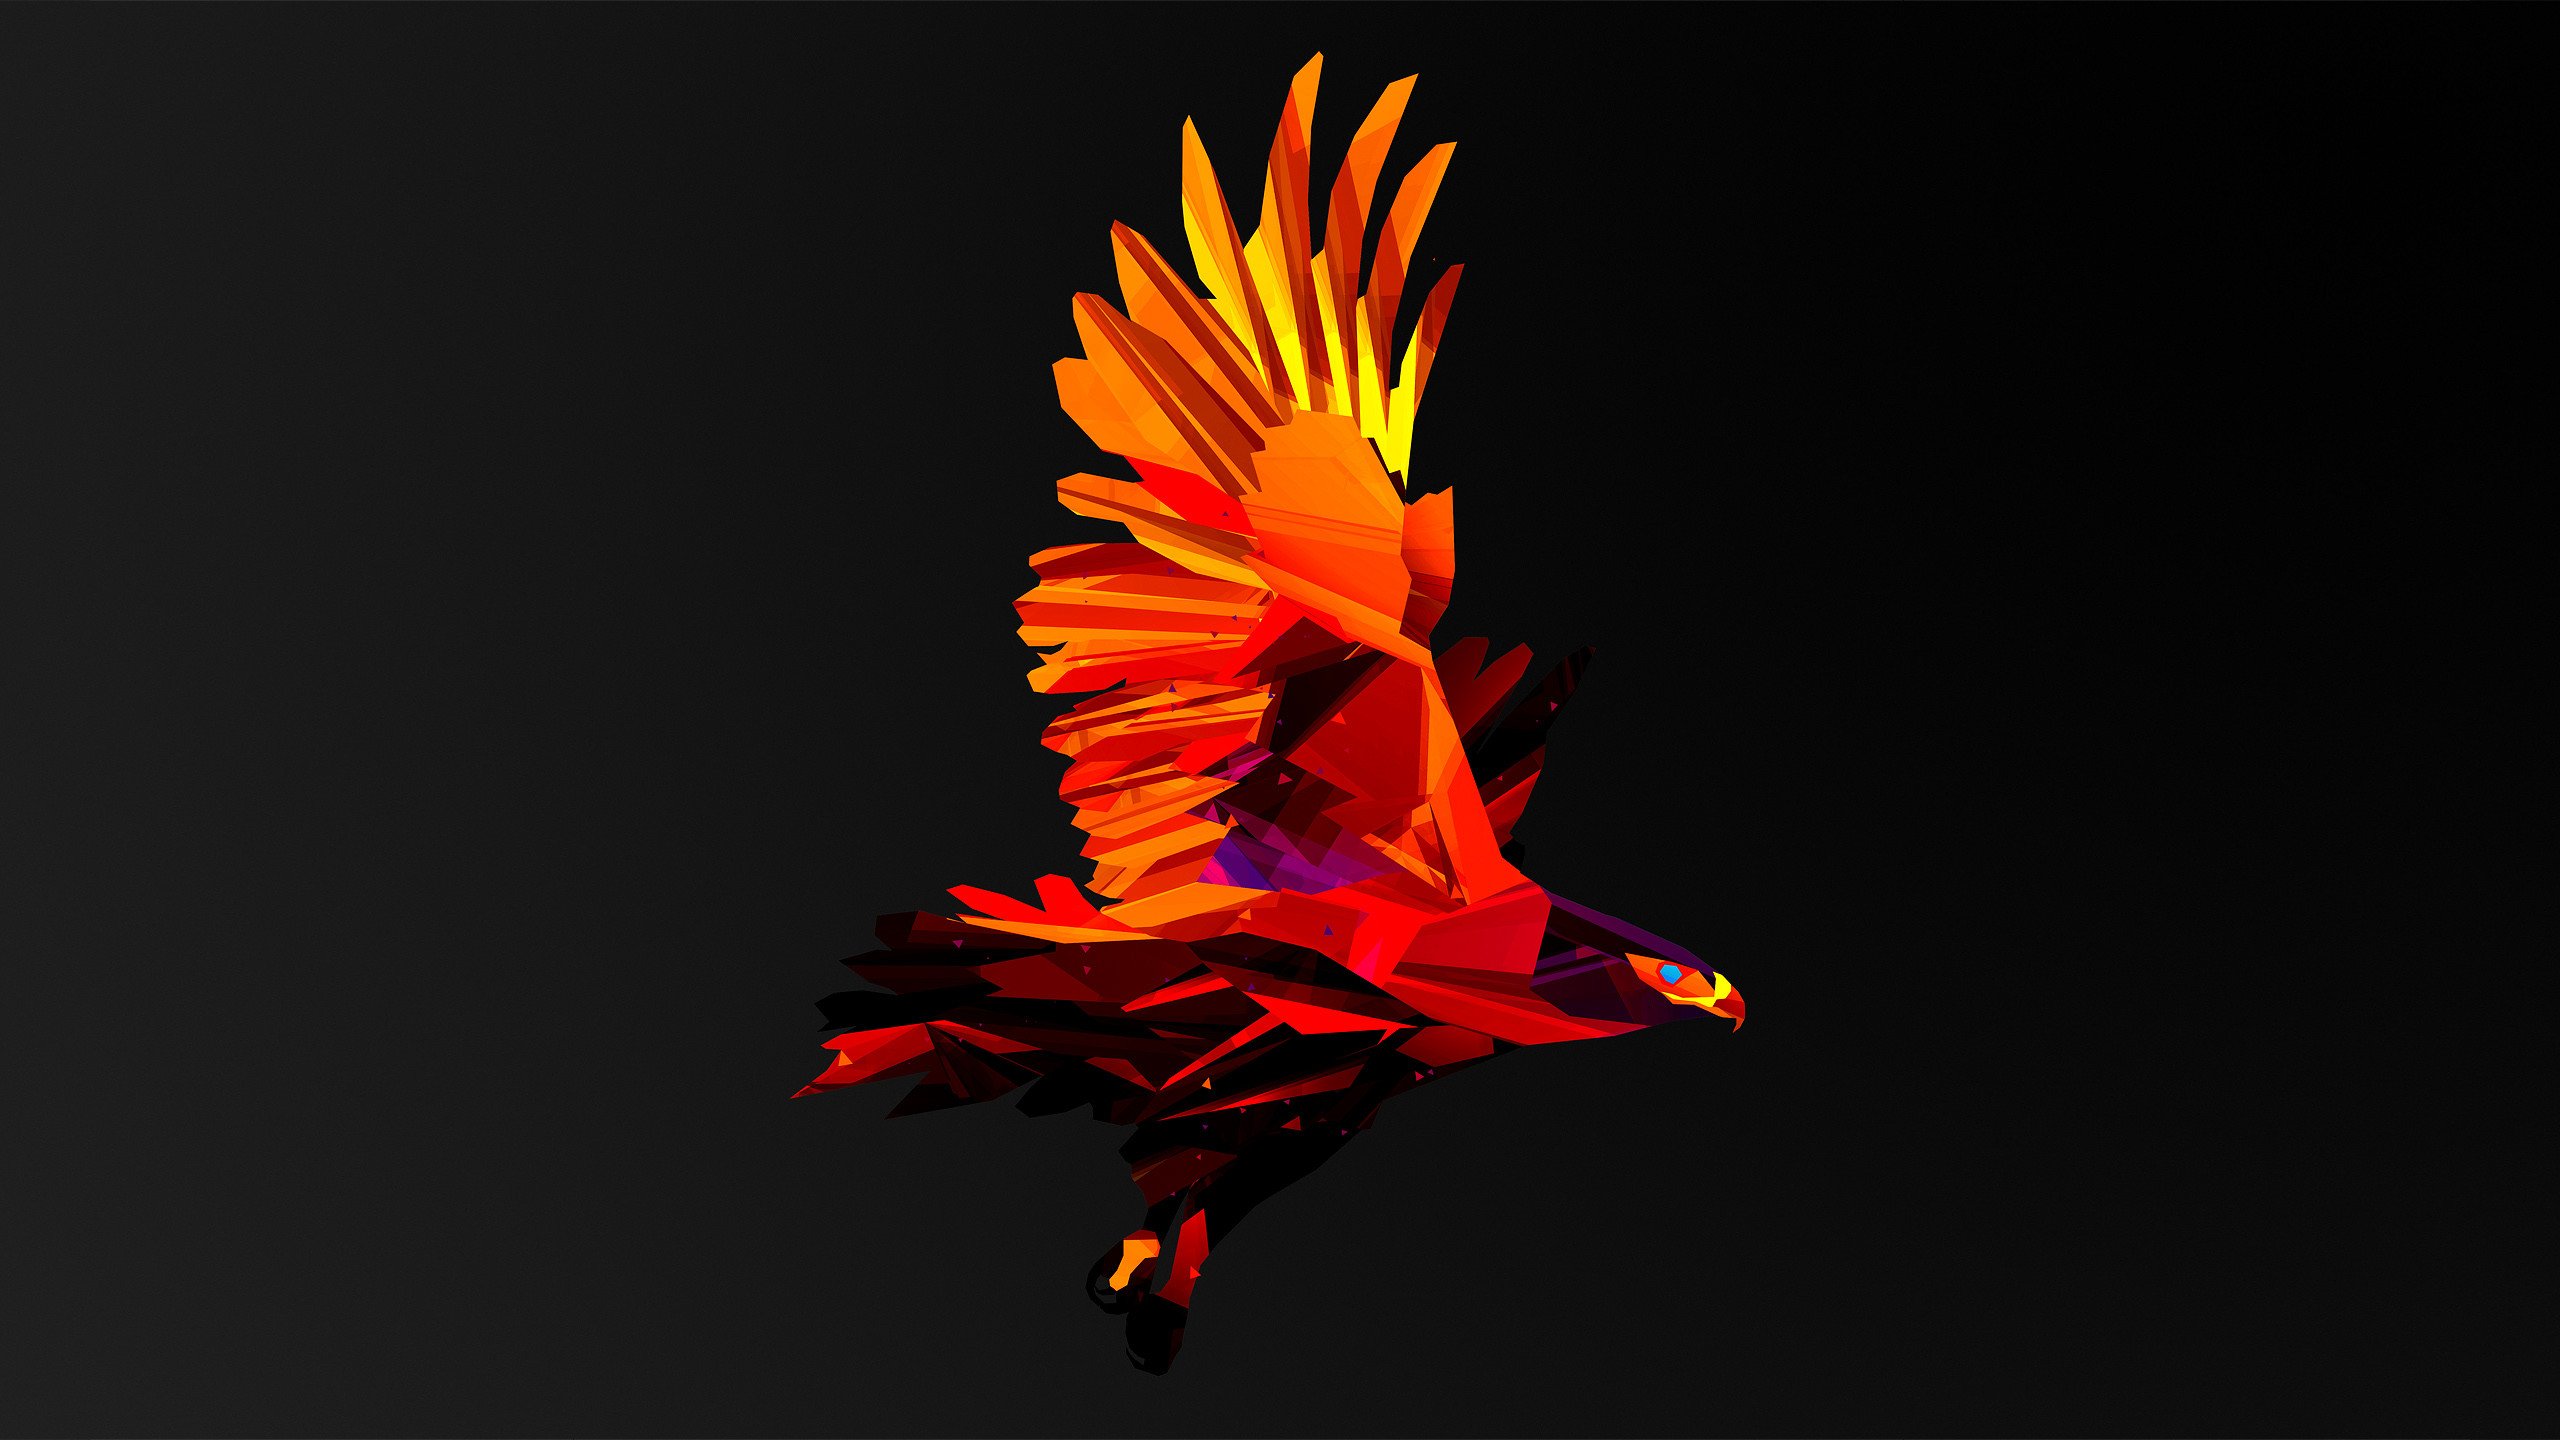 Bird Abstract psychedelic wallpaper background